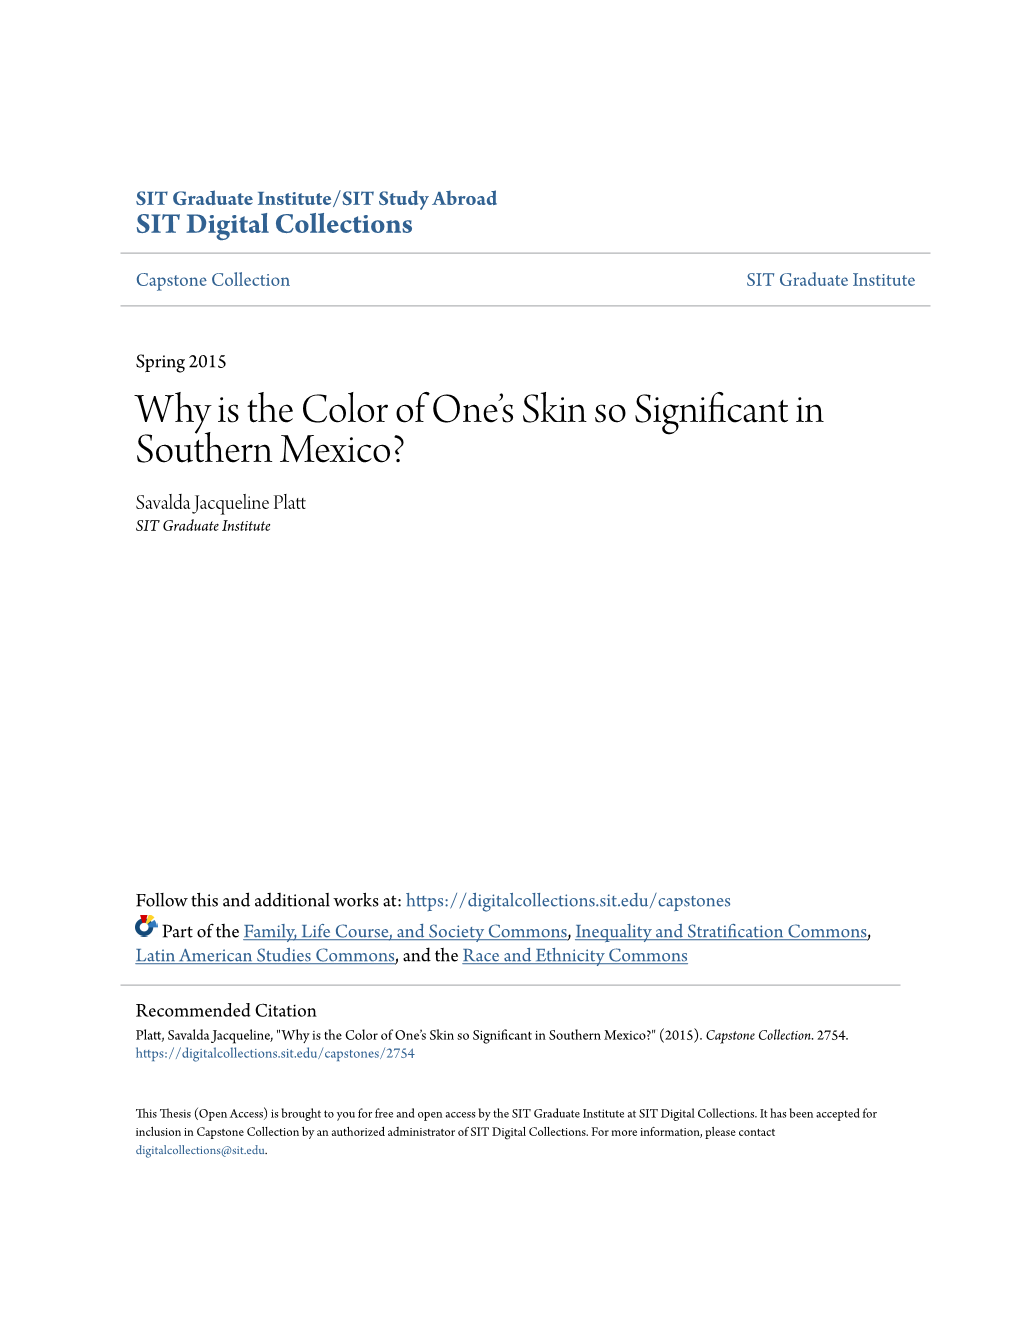 Why Is the Color of One's Skin So Significant in Southern Mexico?